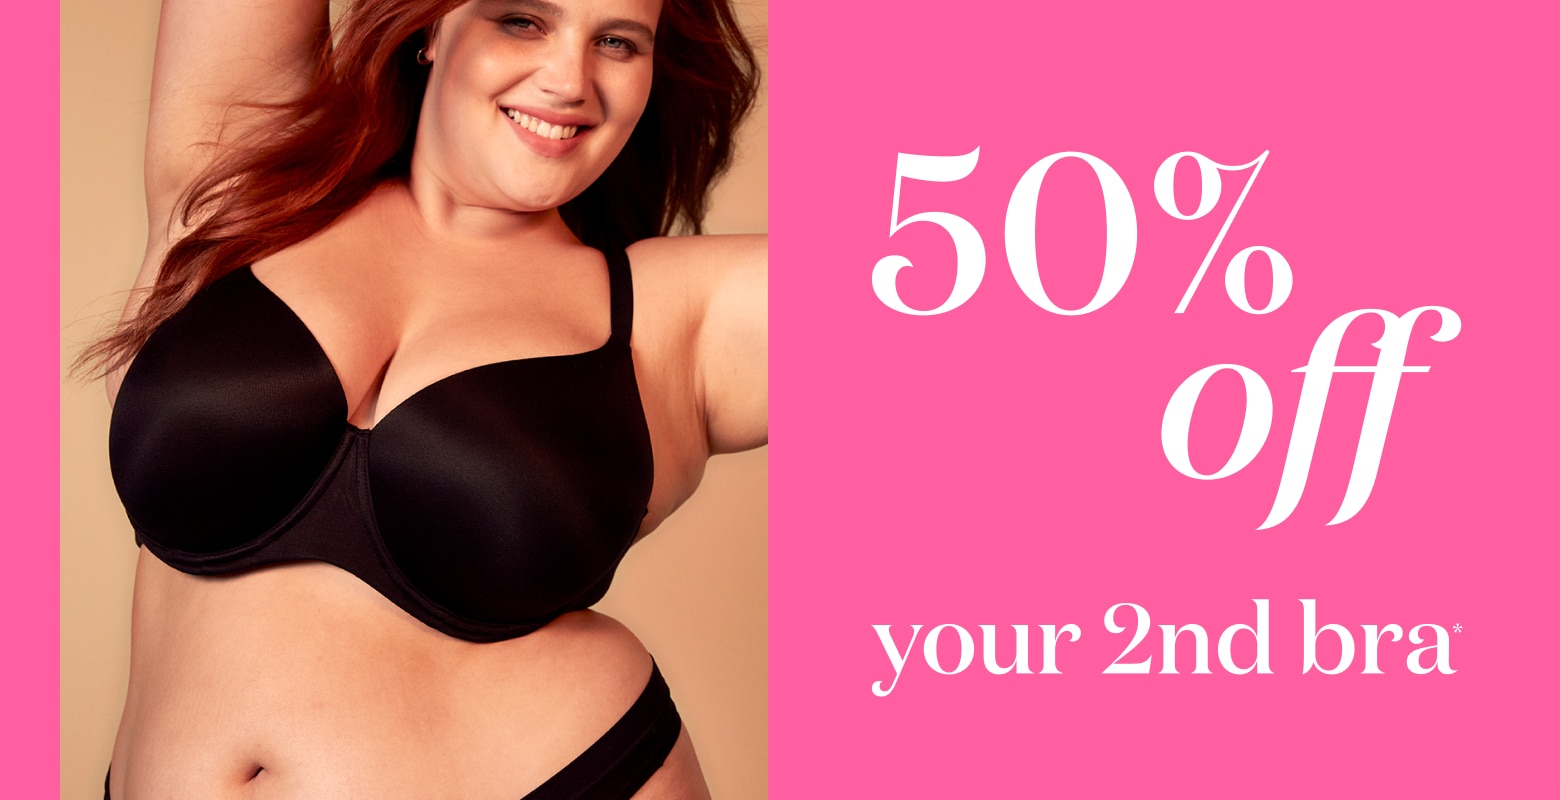 50% OFF your 2nd bra.